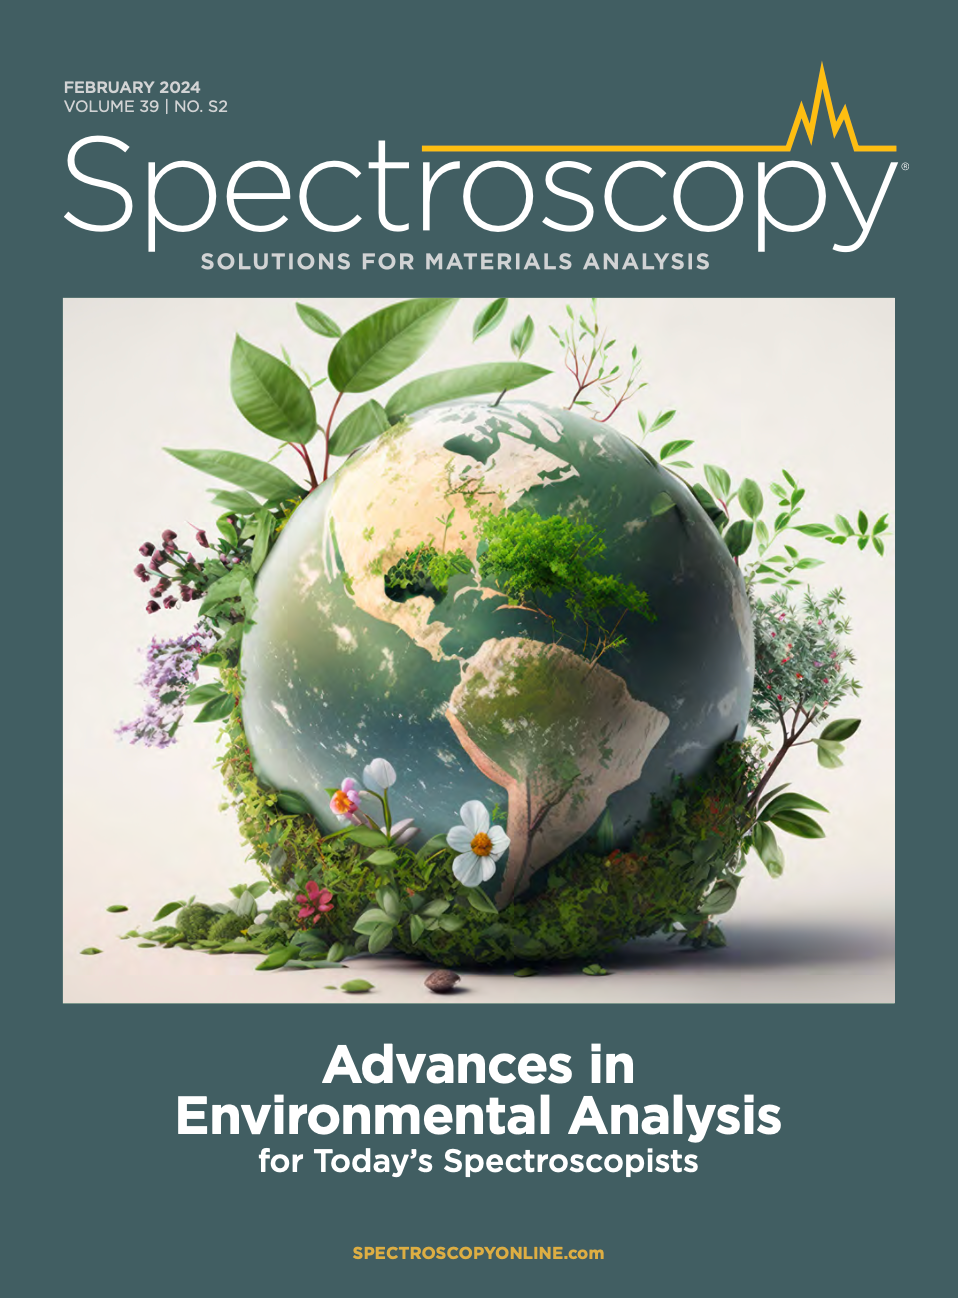 Advances in Environmental Analysis for Today's Spectroscopists